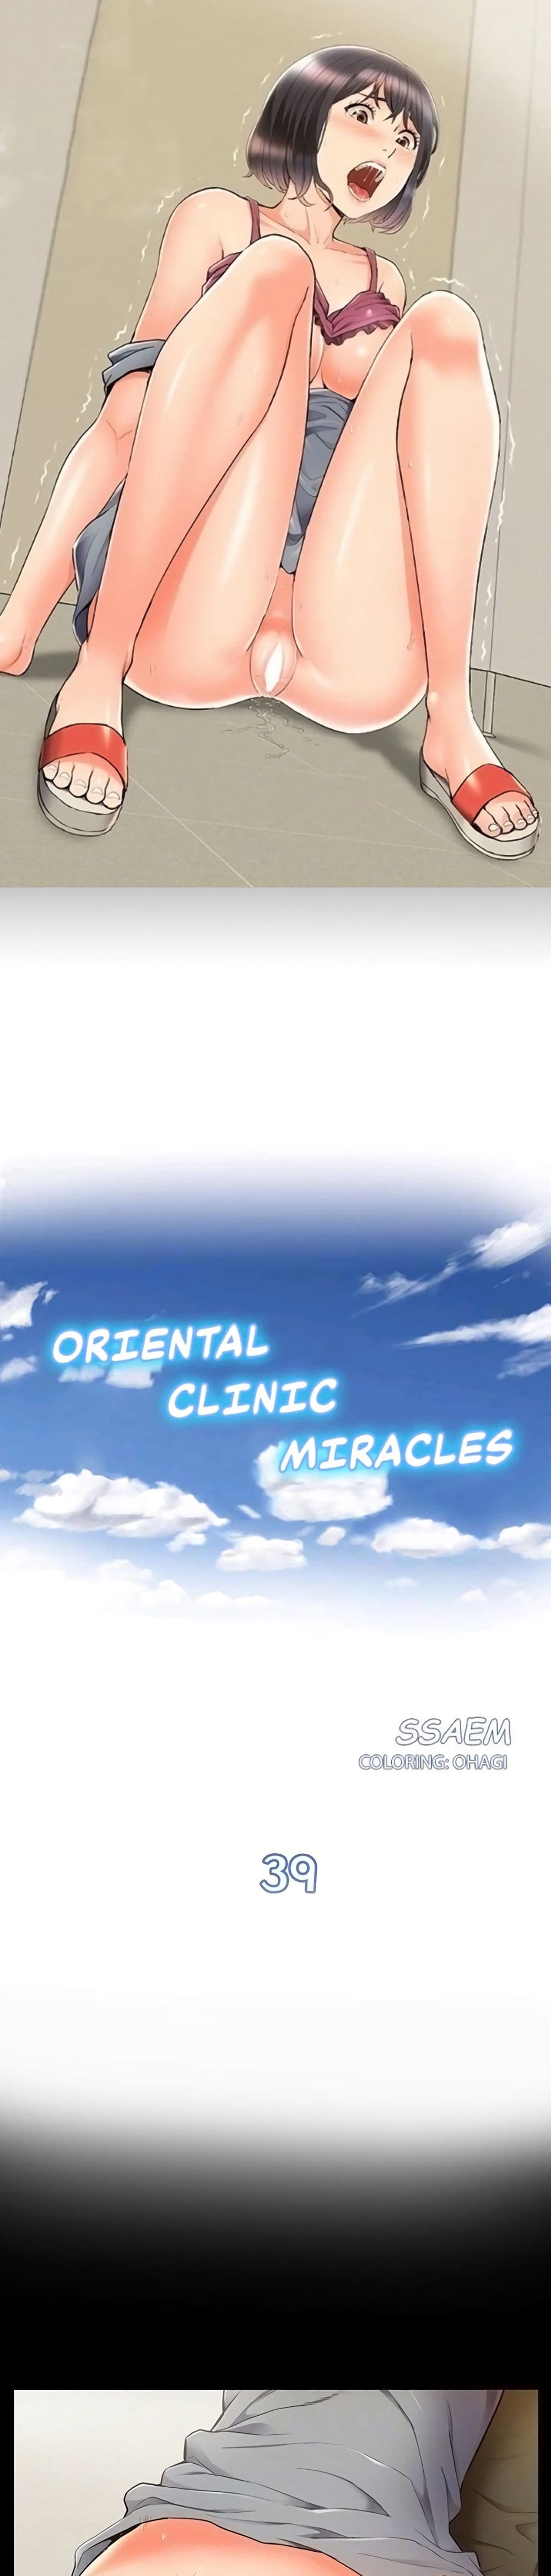 Oriental Clinic Miracles39 (1)